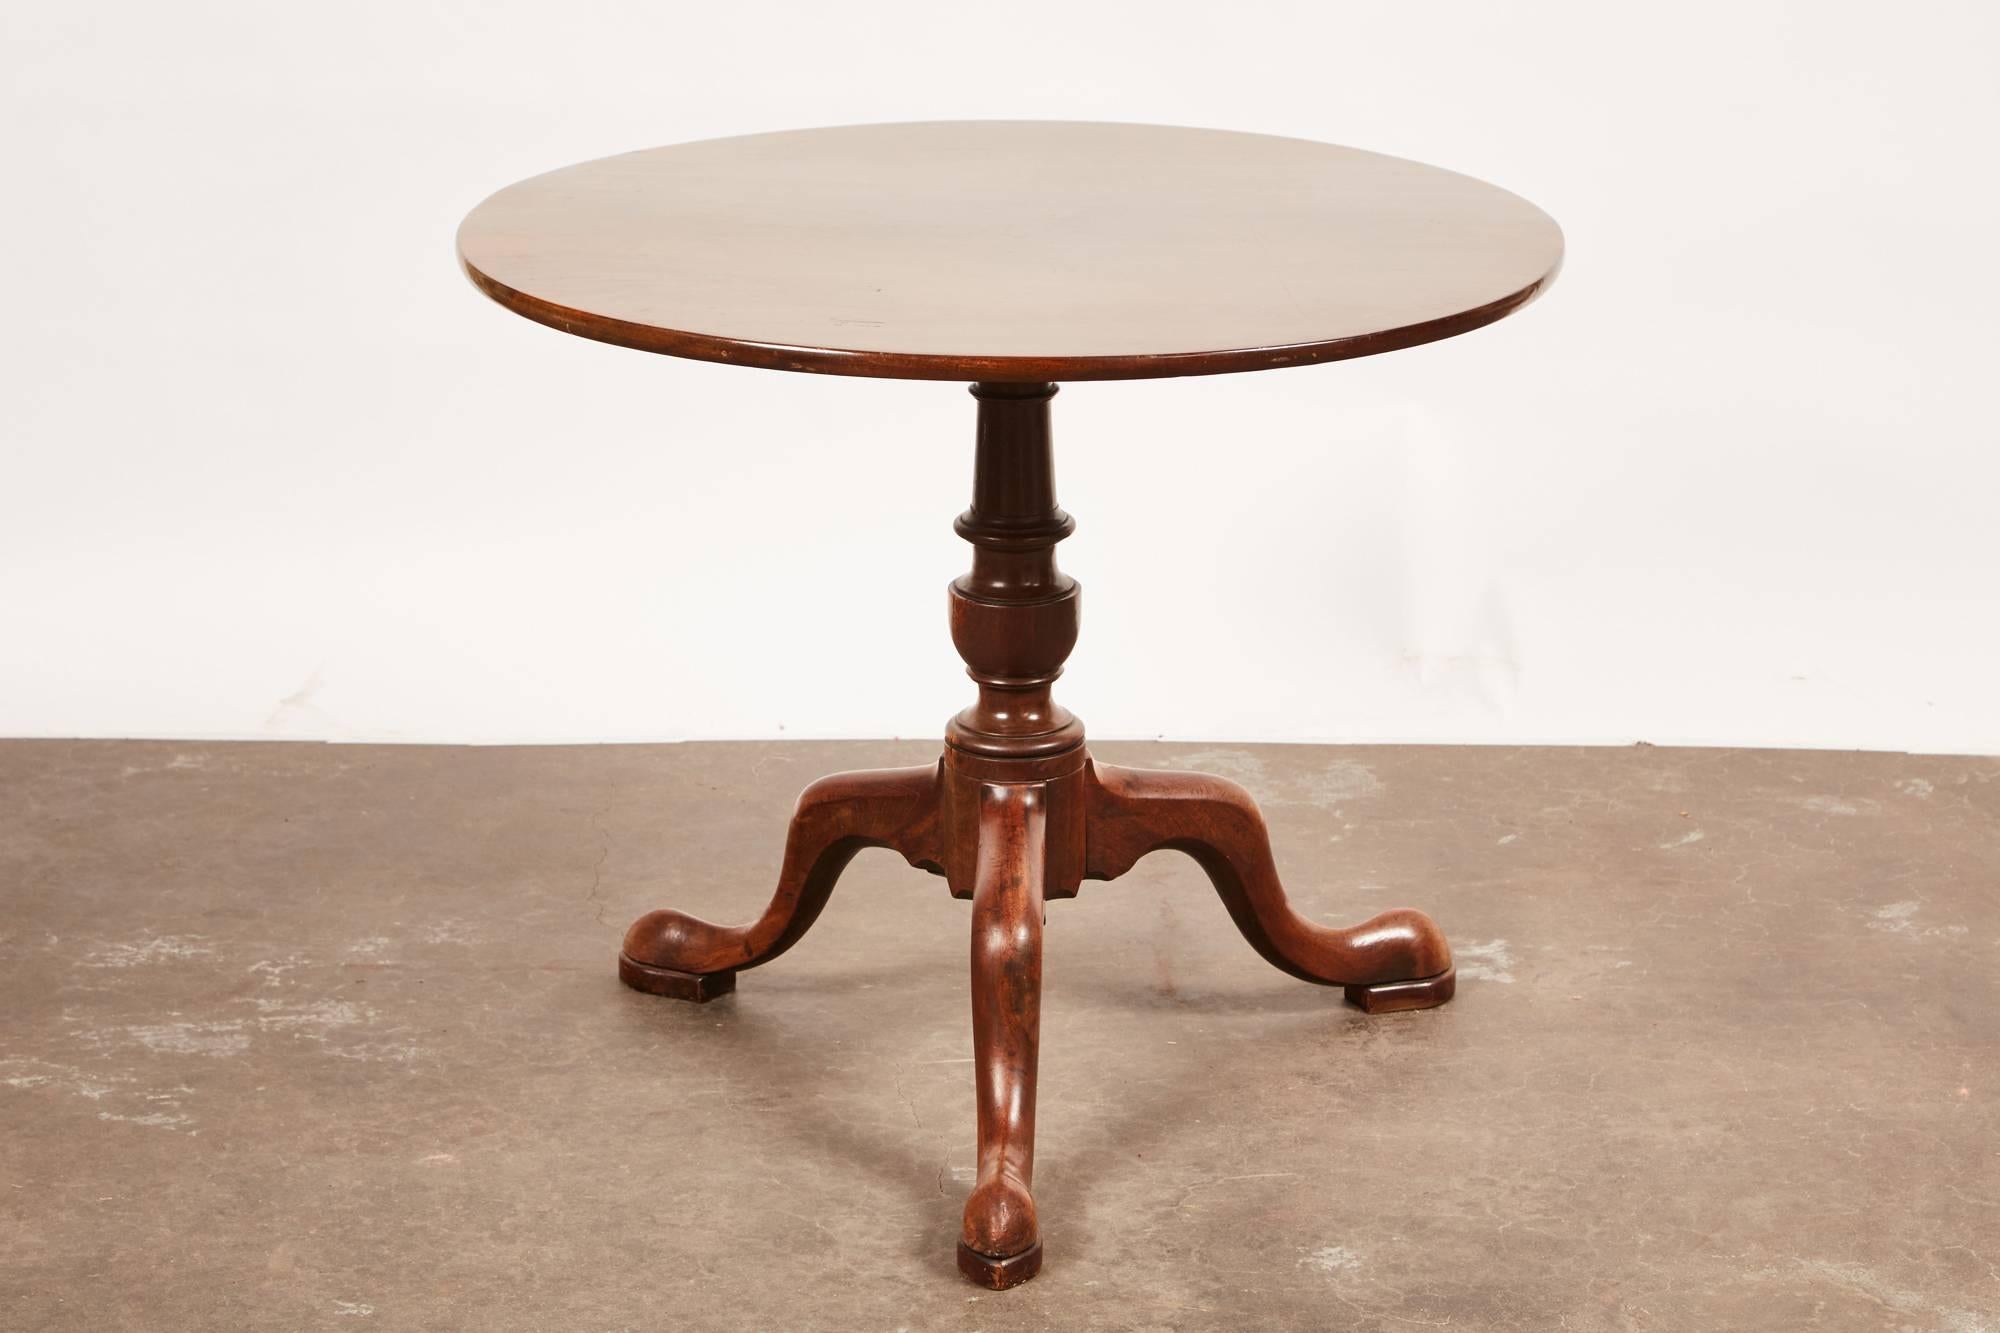 A 19th century English Queen Anne mahogany pedestal table on a tripod base.